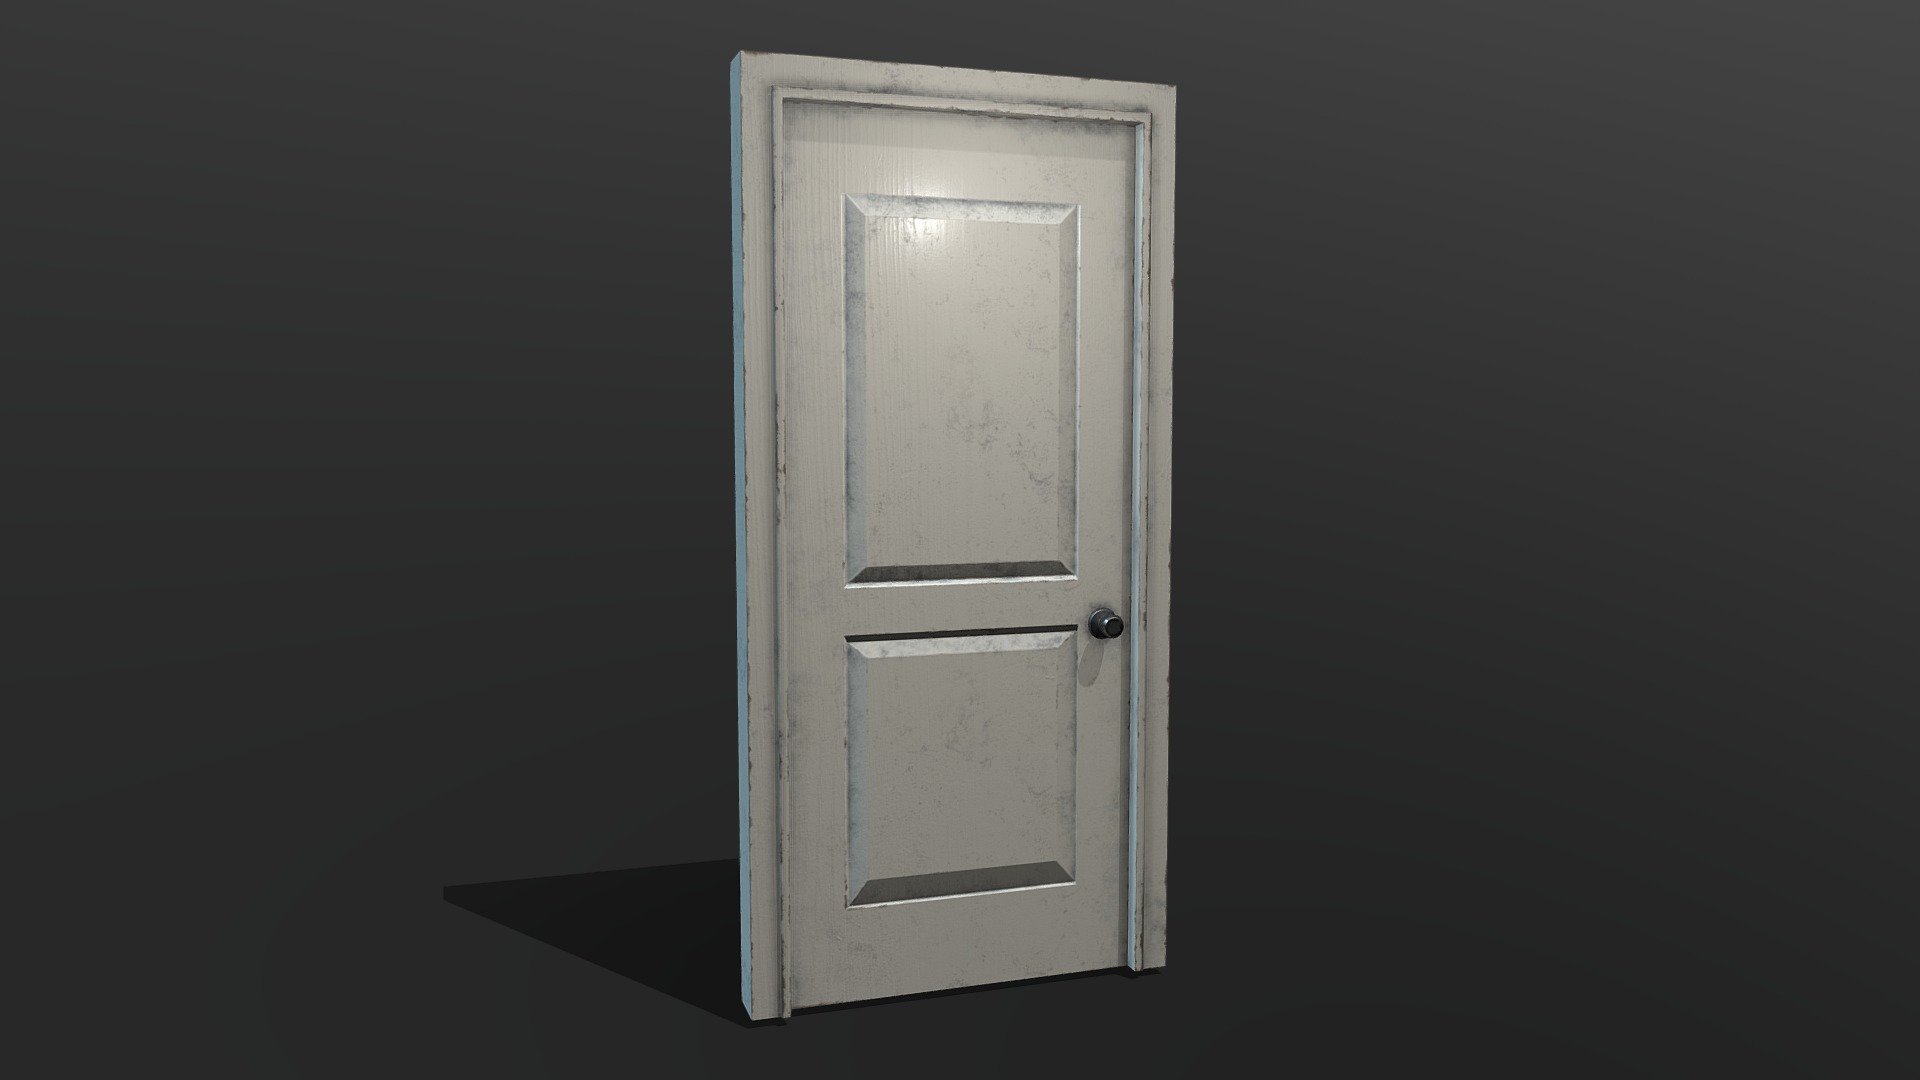 Door Model from my wip environment based on Silent Hill 4 Room302.
Feel free to download and leave a comment~


Artstation : https://www.artstation.com/zian0912 - Door - Download Free 3D model by Zian (@zian_0912) 3d model